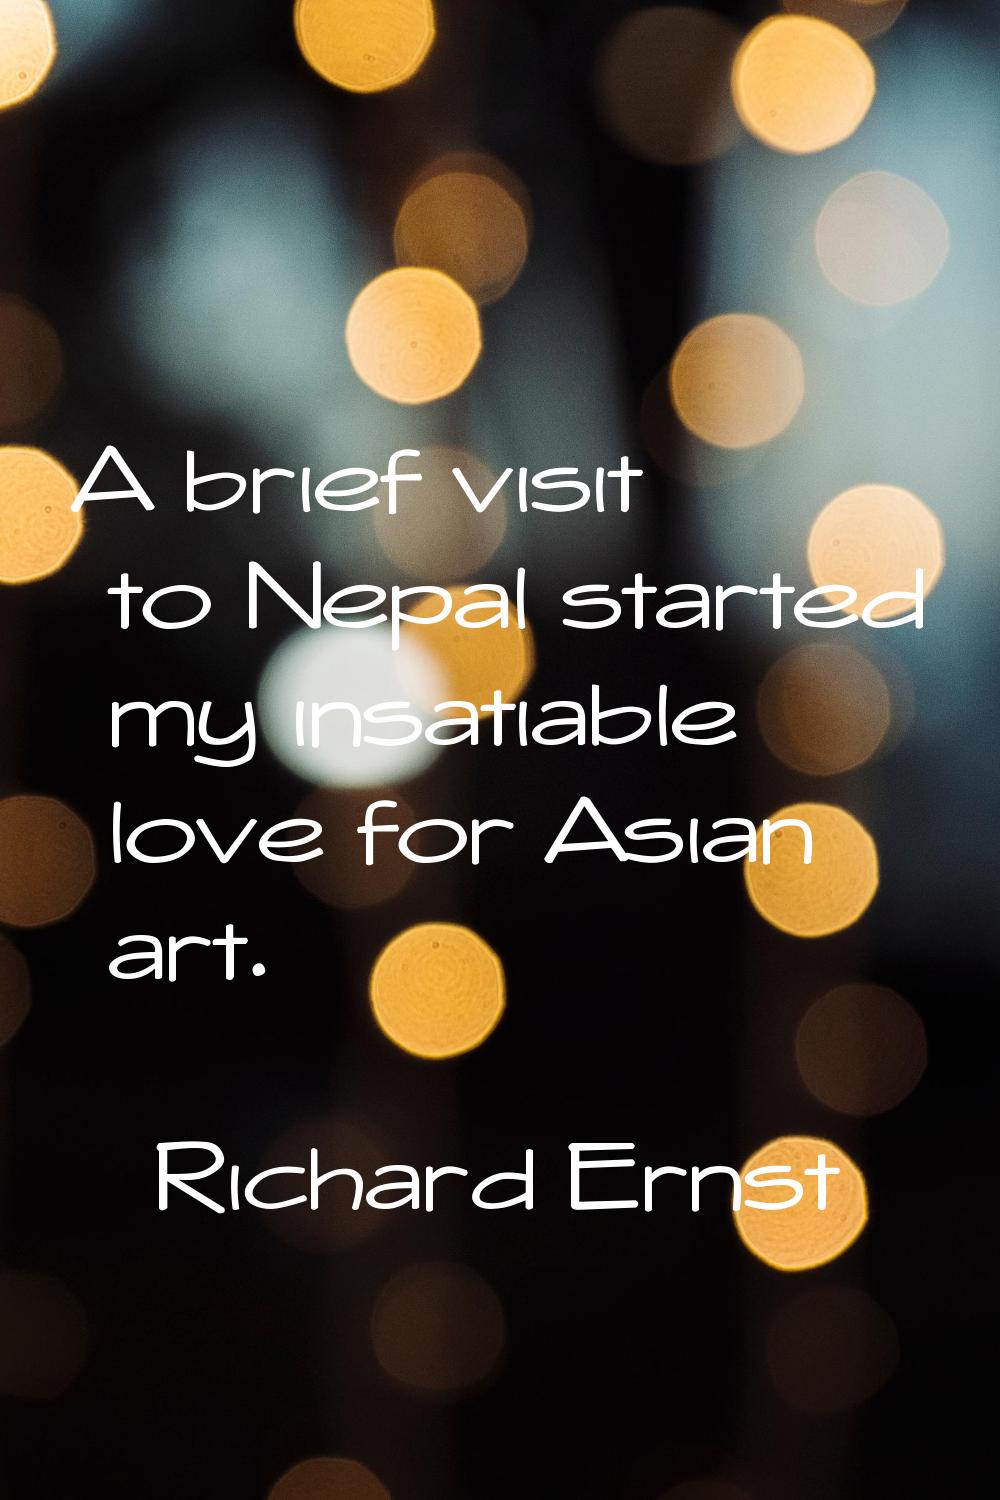 A brief visit to Nepal started my insatiable love for Asian art.